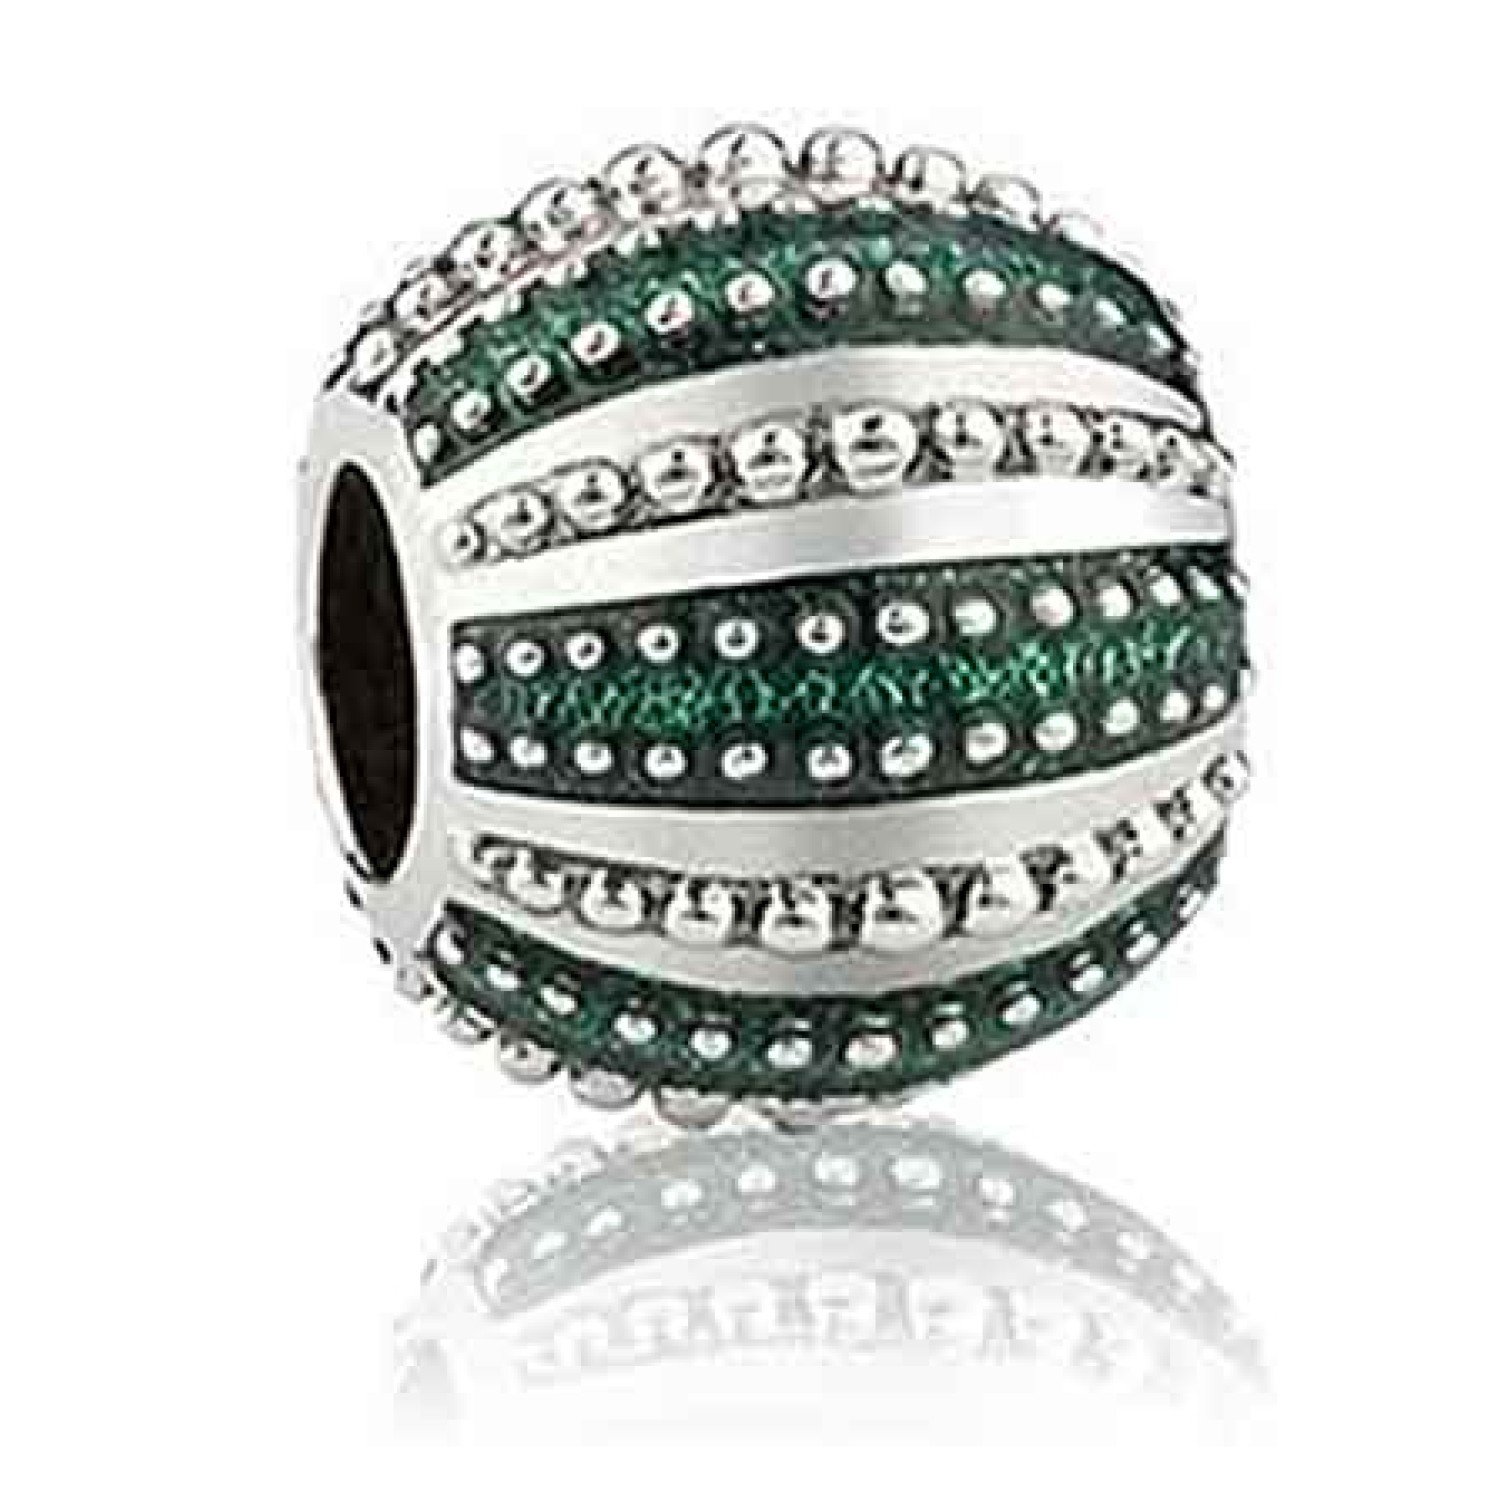 LKE031 Evolve Charms Treasured Kina Silver. The kina is a sea urchin found widely along New Zealand coastlines. This striking green enamel charm is inspired by the kina’s exquisite green shell textured with pearlescent white dots. This traditional and pop